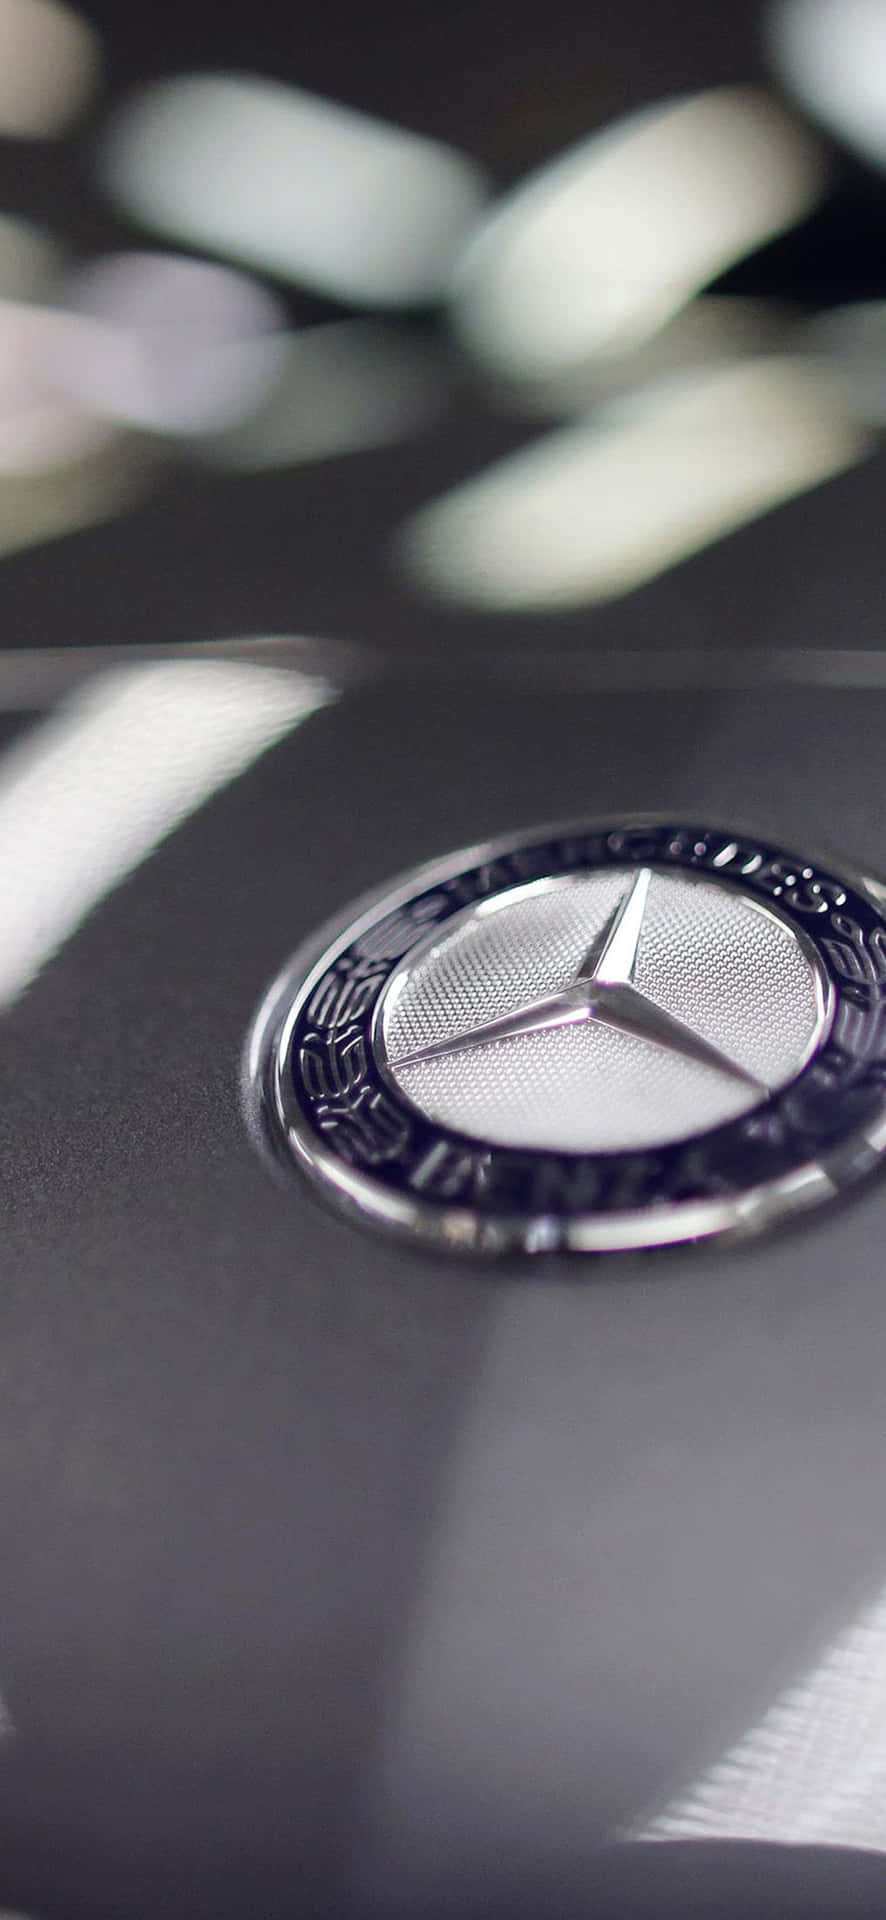 A Luxurious Combination - The Mercedes Benz and the iPhone Wallpaper